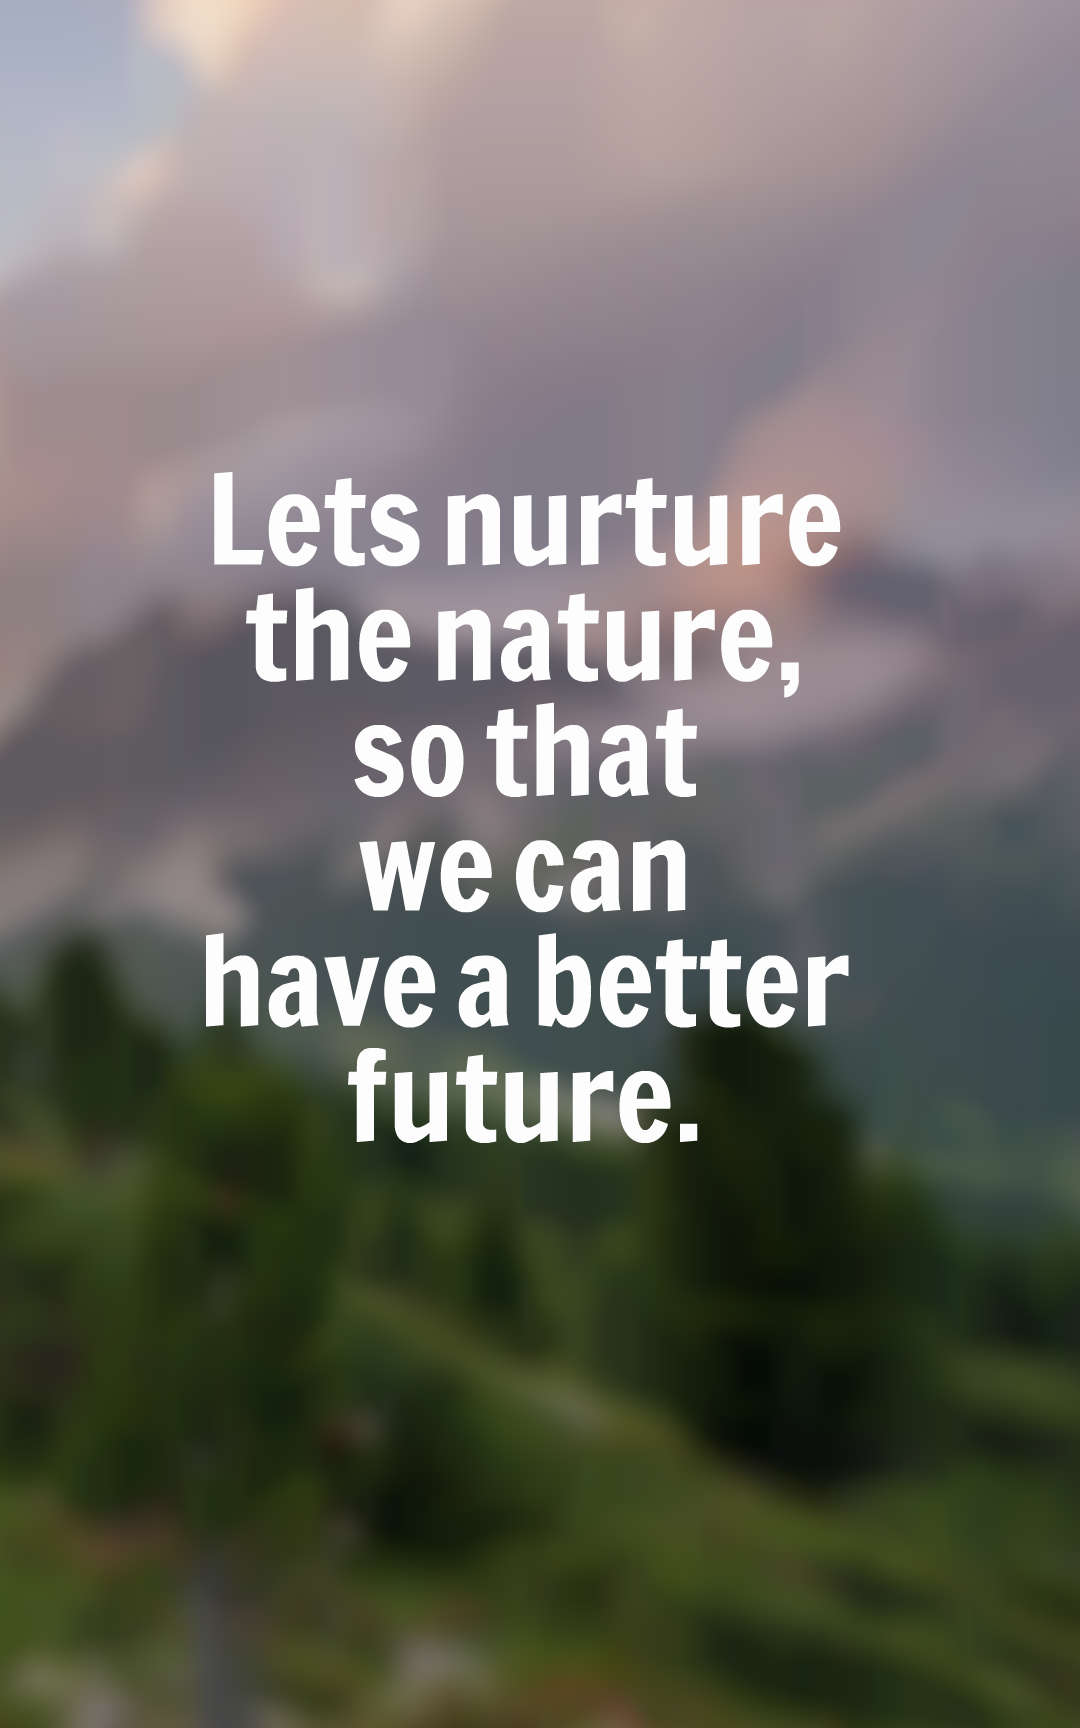 Lets nurture the nature, so that we can have a better future.